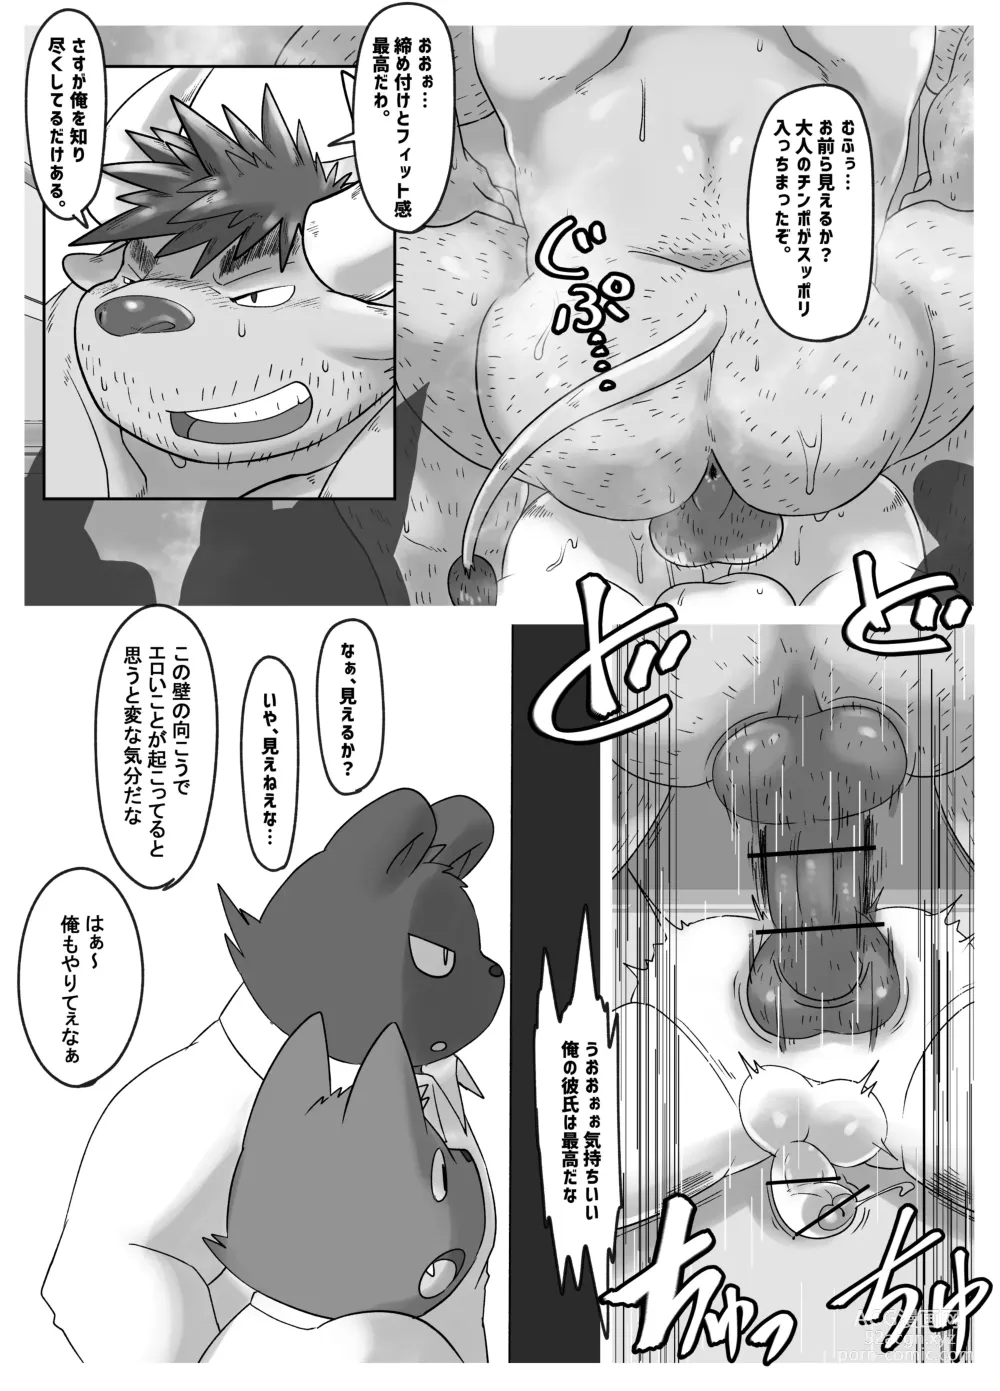 Page 25 of doujinshi Muscular Bull Teacher & Chubby Tiger Student 4